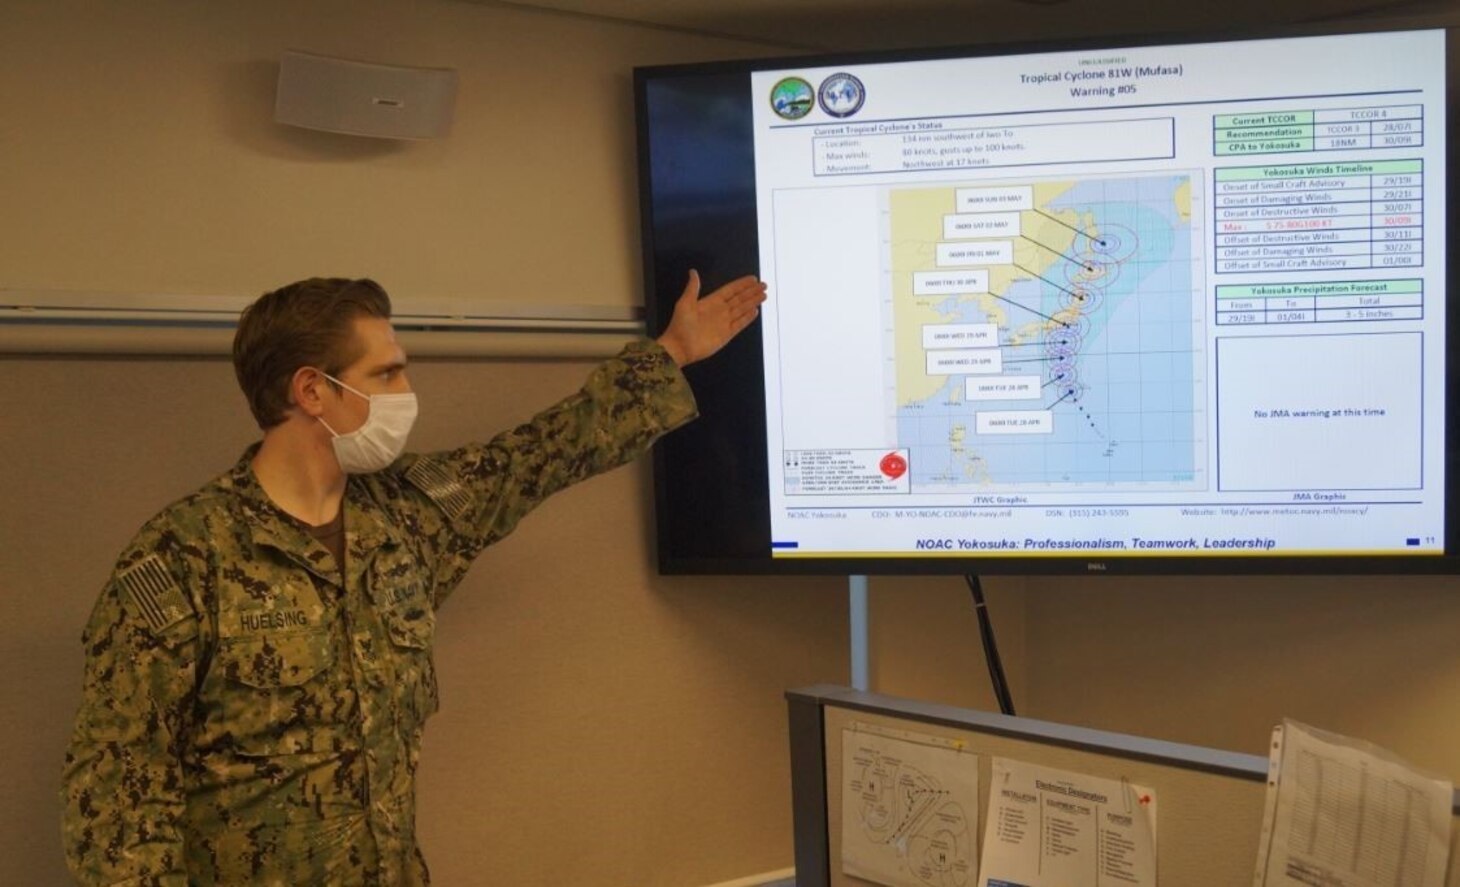 Aerographer's Mate 1st Class Huelsing from the Naval Oceanography Anti-Submarine Warfare Center (NOAC) in Yokosuka, Japan, briefs the Tropical Cyclone Condition of Readiness winds timeline for Commander Fleet Activities Yokosuka (CFAY) as part of the annual Typhoon Ready Reliant Gale (TRRG) exercise on Apr. 26, 2020.